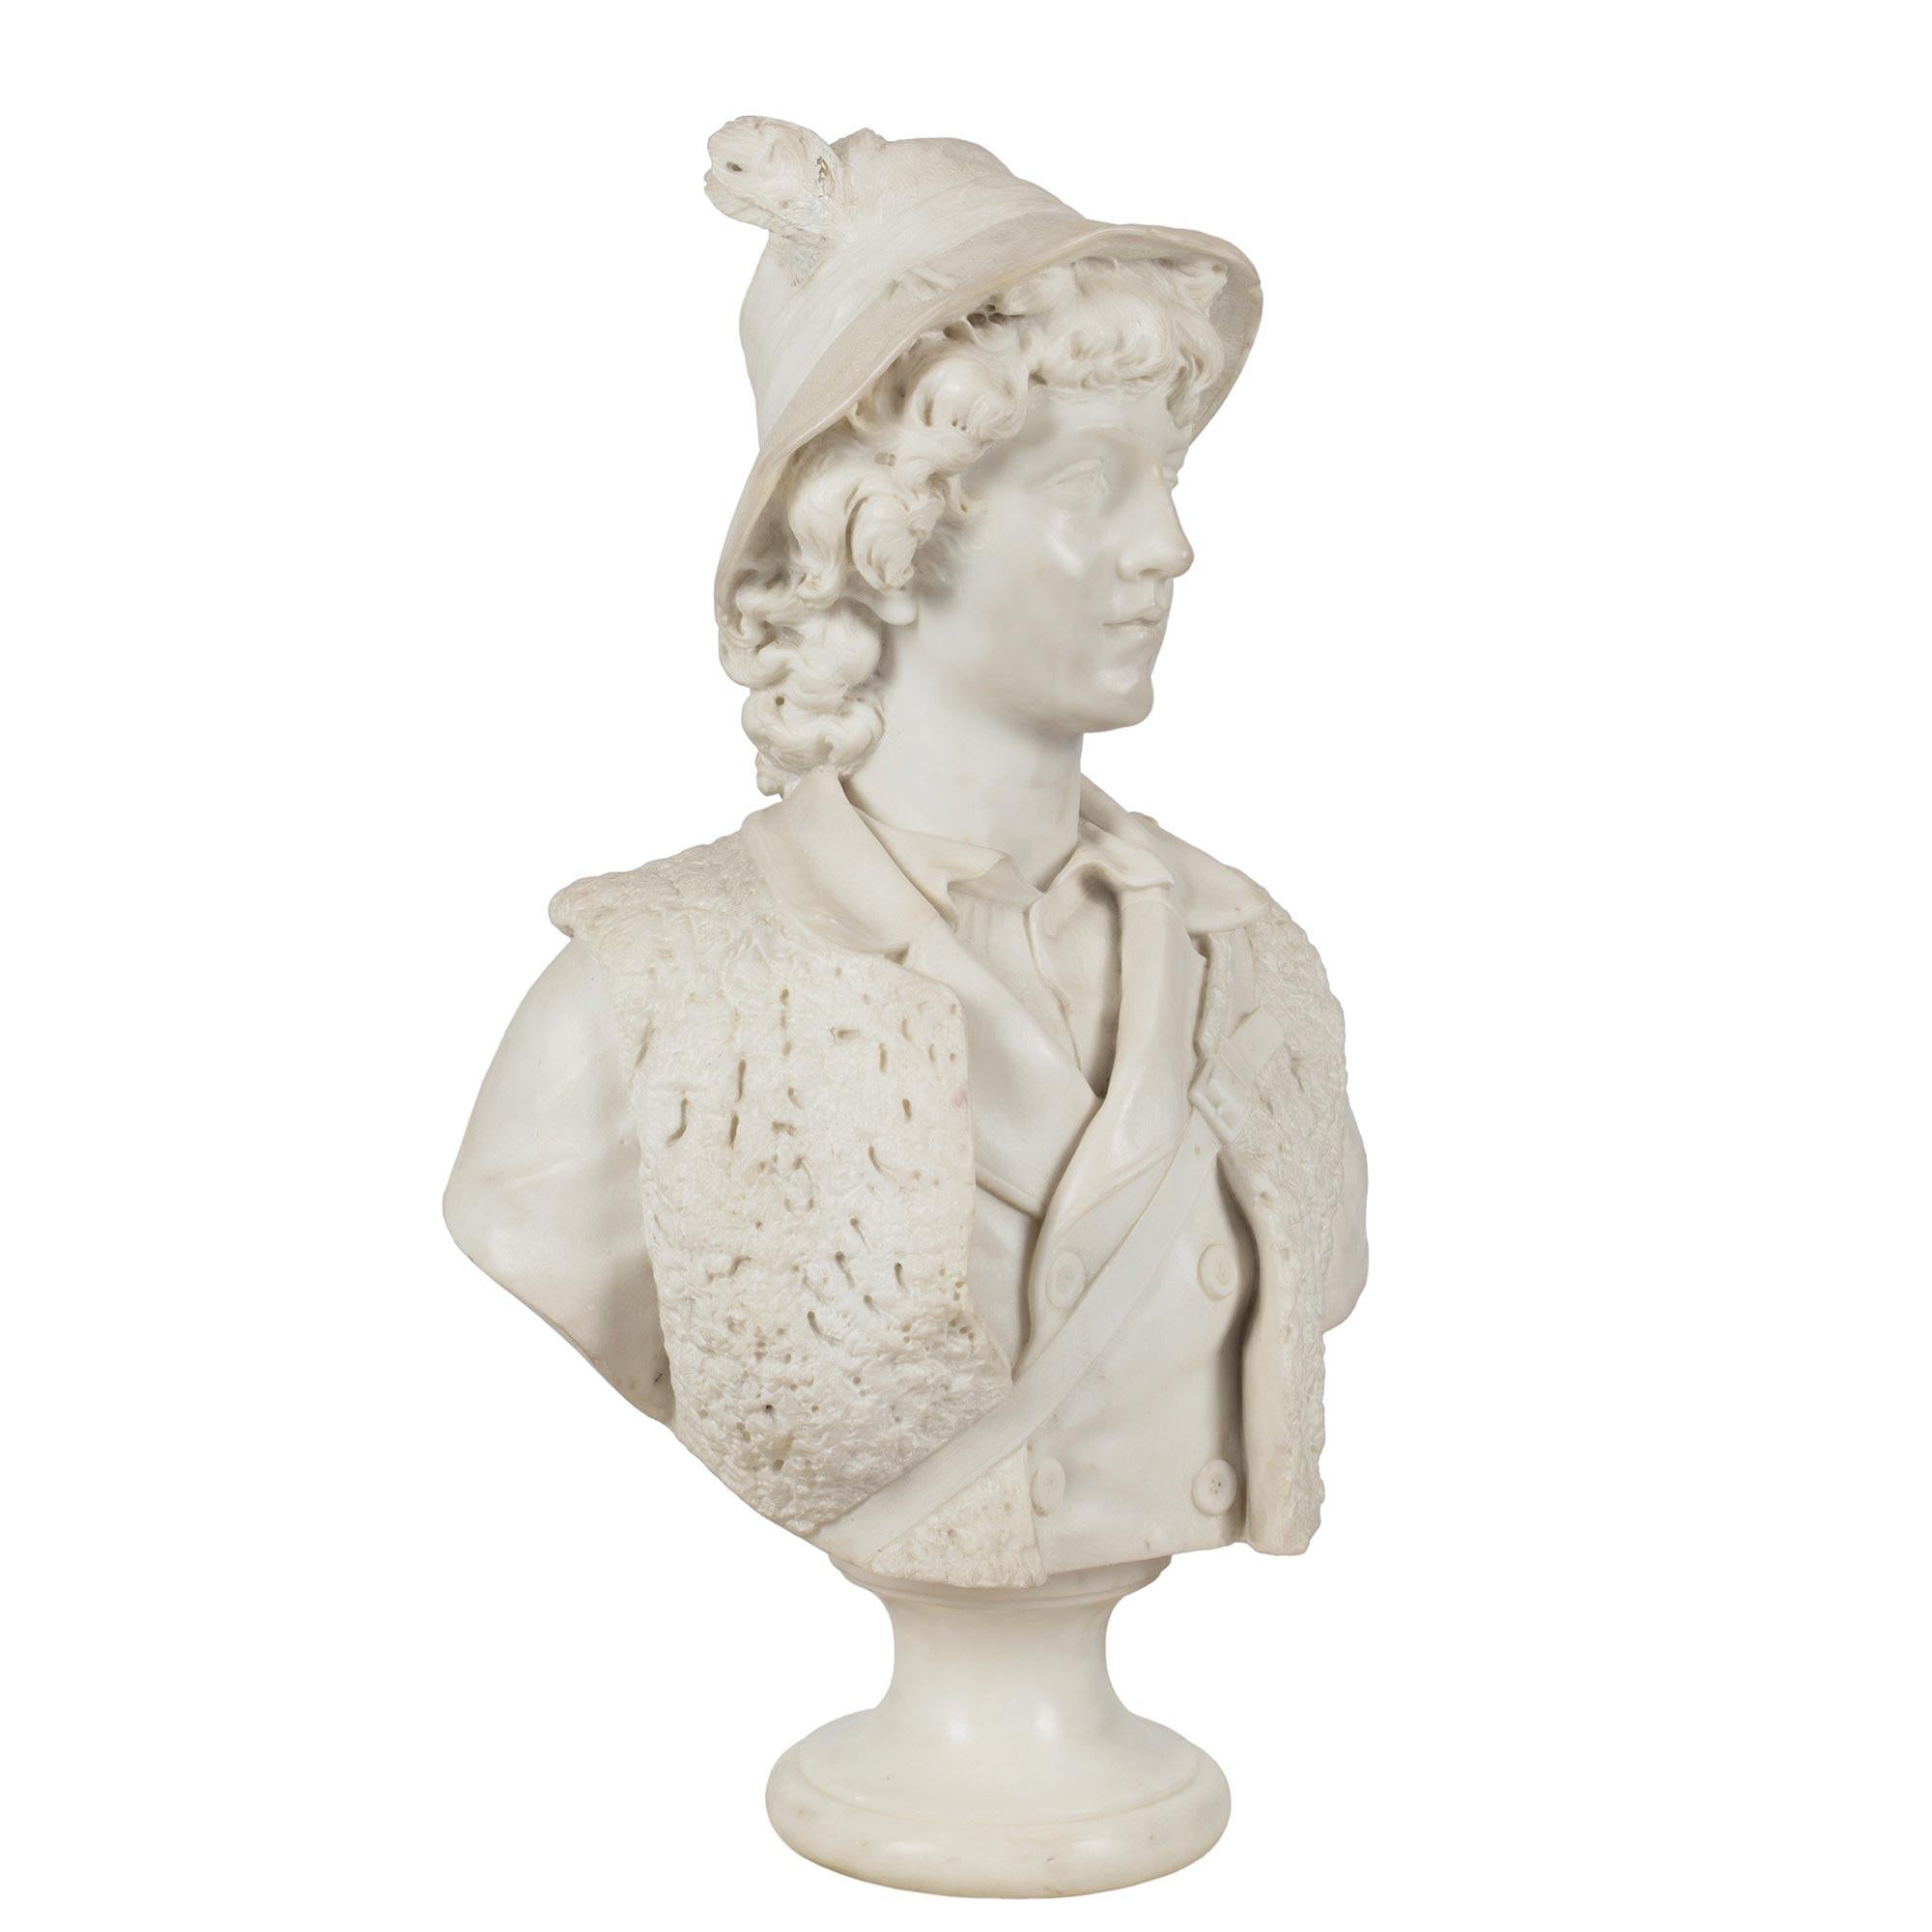 An impressive and wonderfully executed Italian 19th century white Carrara marble bust of a young hunter. The bust is raised by a circular mottled socle pedestal. The charming young man is wearing a shirt with a jacket and sheepskin gilet. He has a